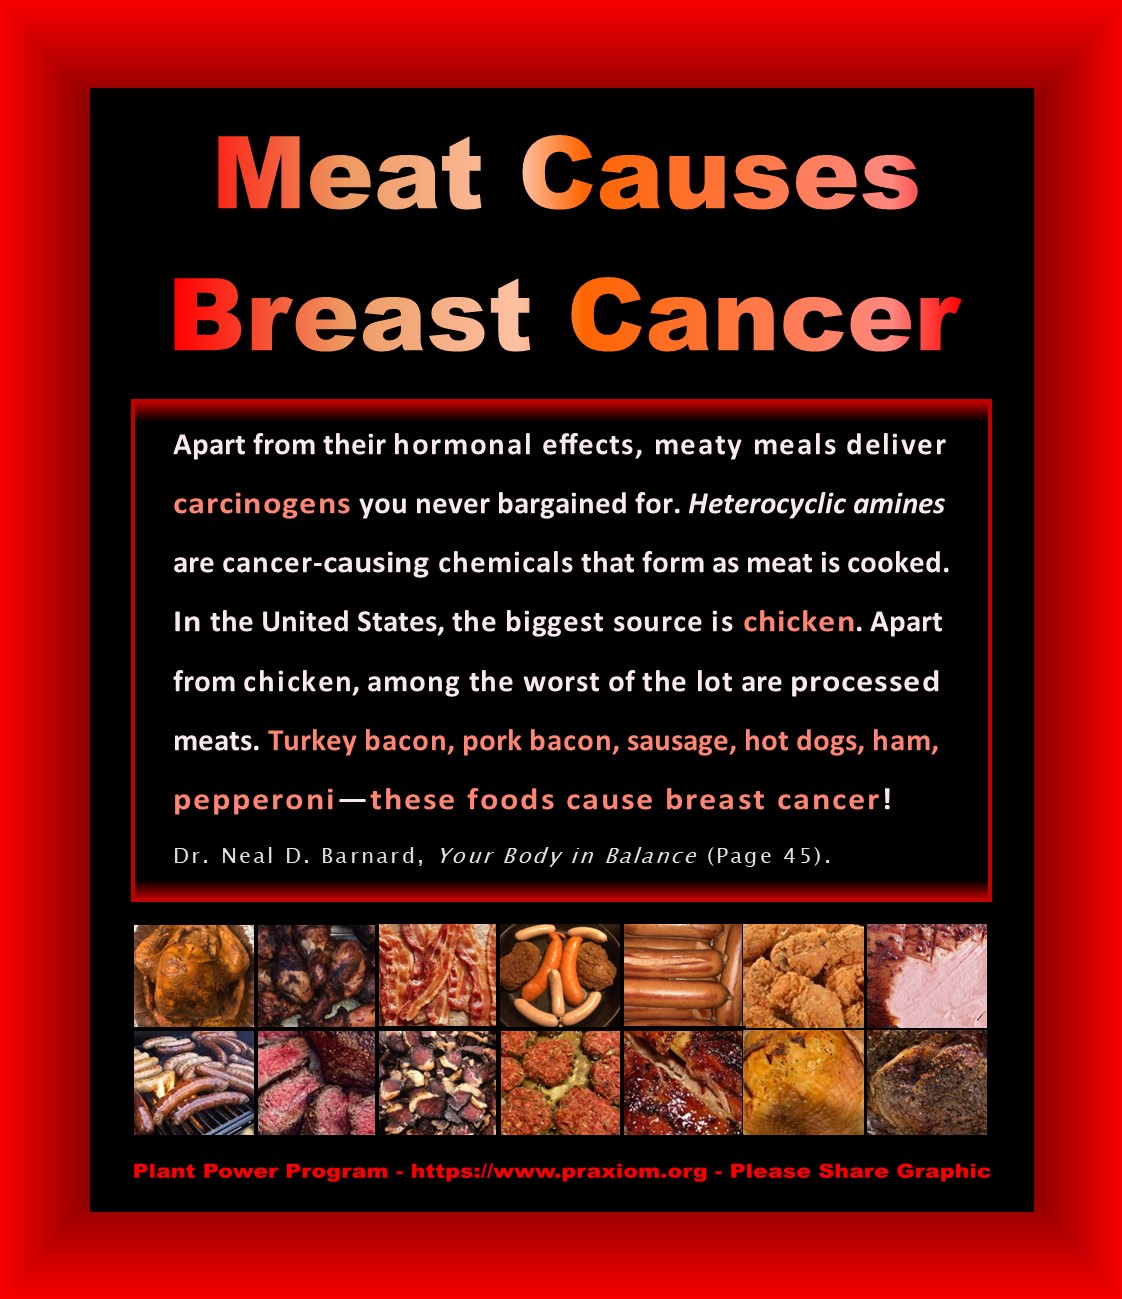 Meat Causes Breast Cancer - Dr. Neal Barnard